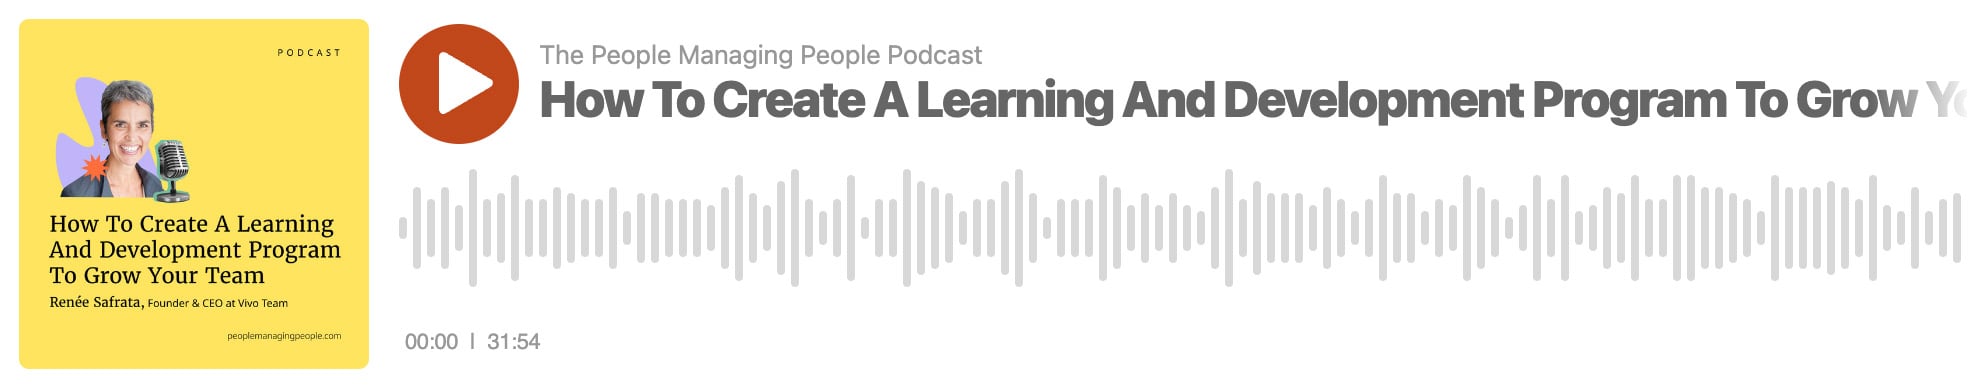 people managing people podcast